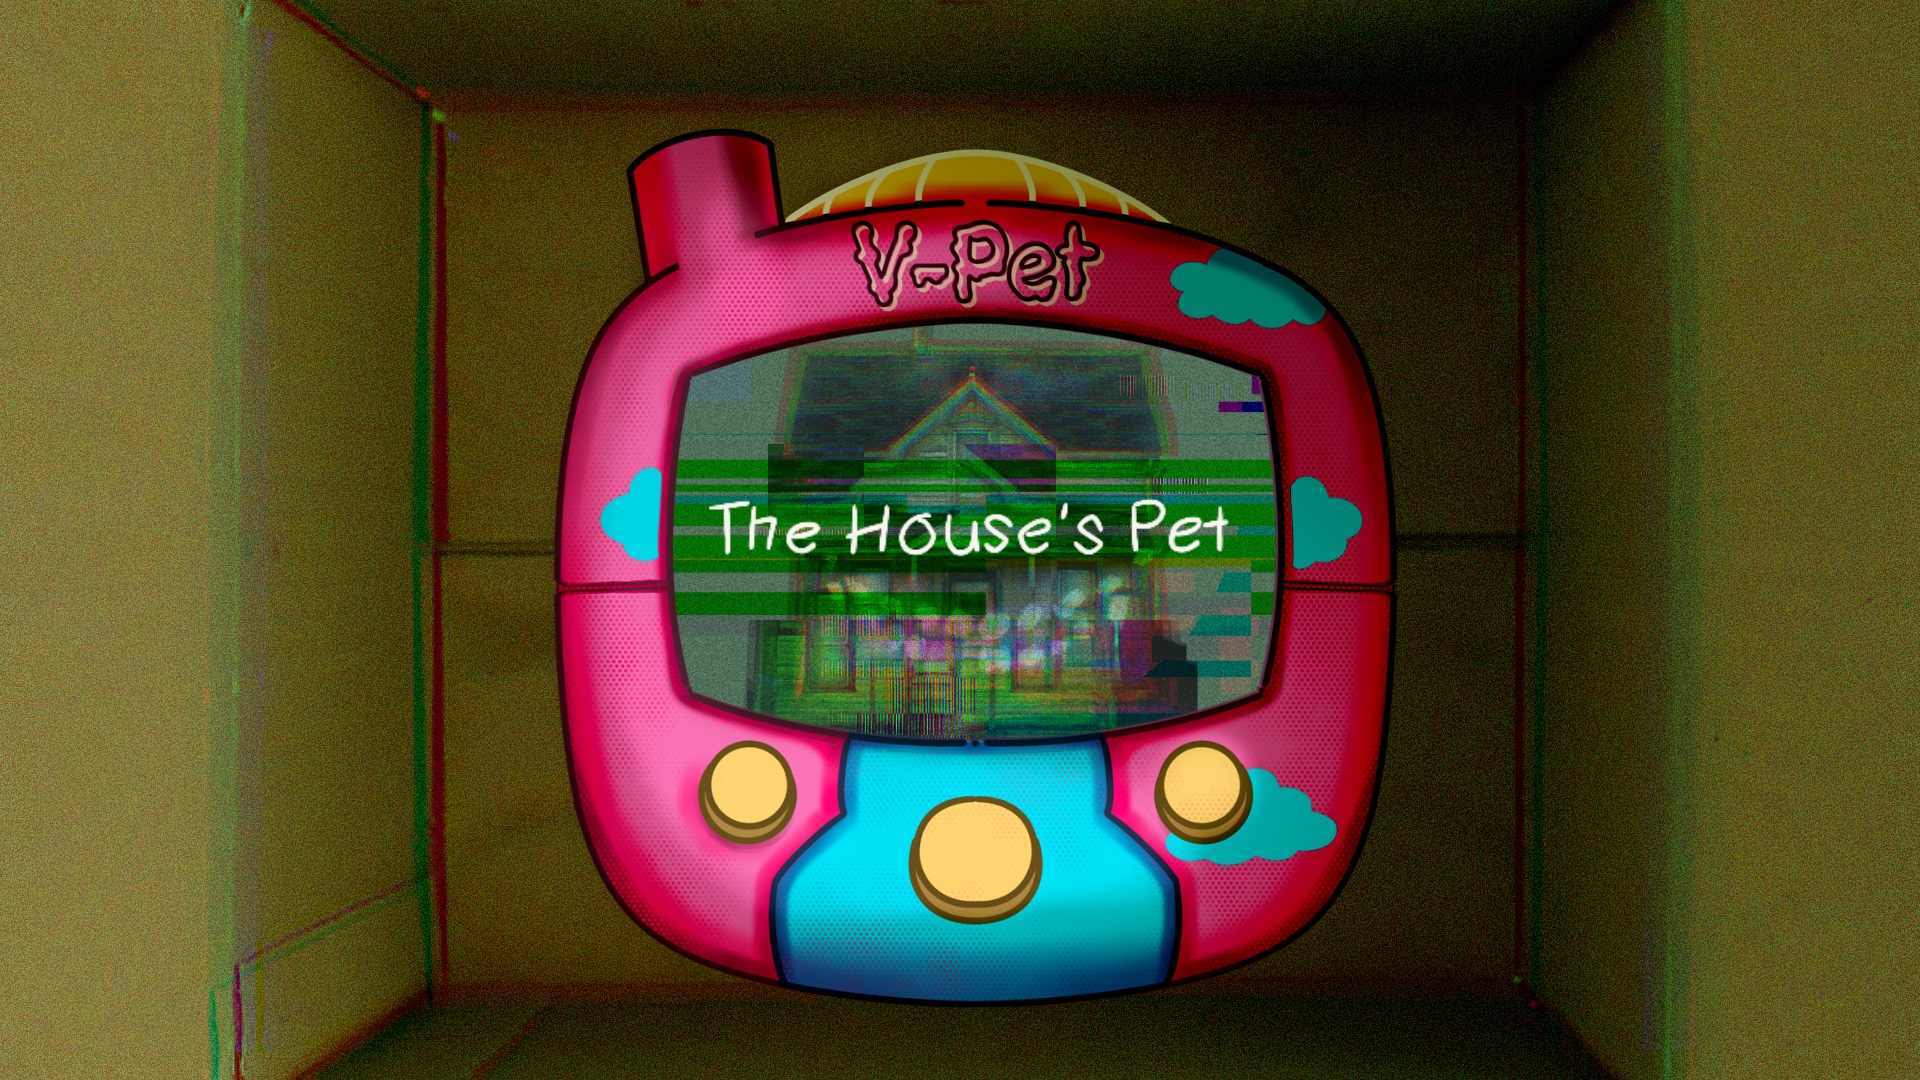 The House's Pet